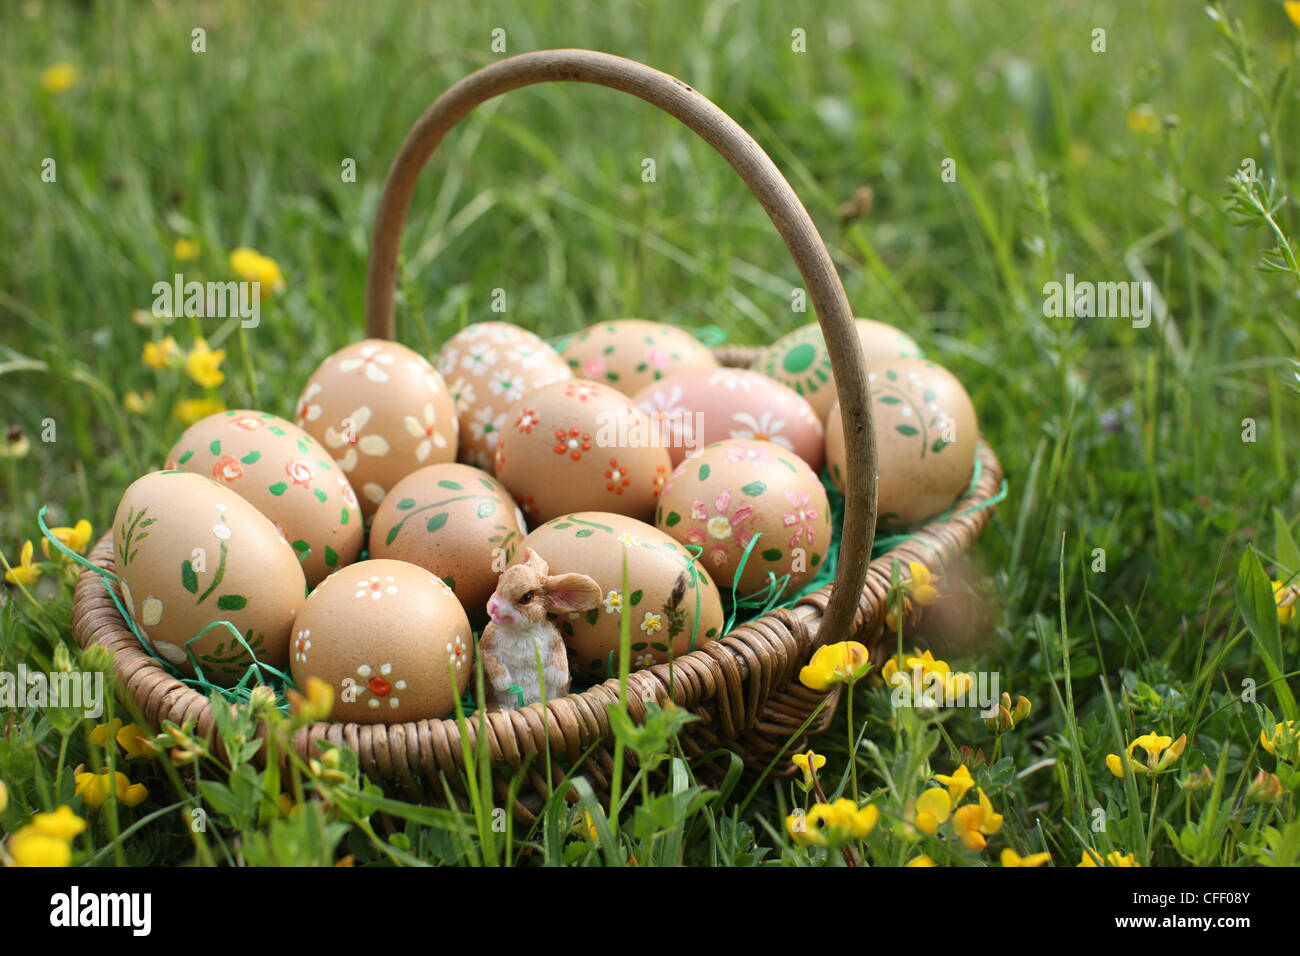 Easter eggs in a basket, Haute-Savoie, France, Europe Stock Photo